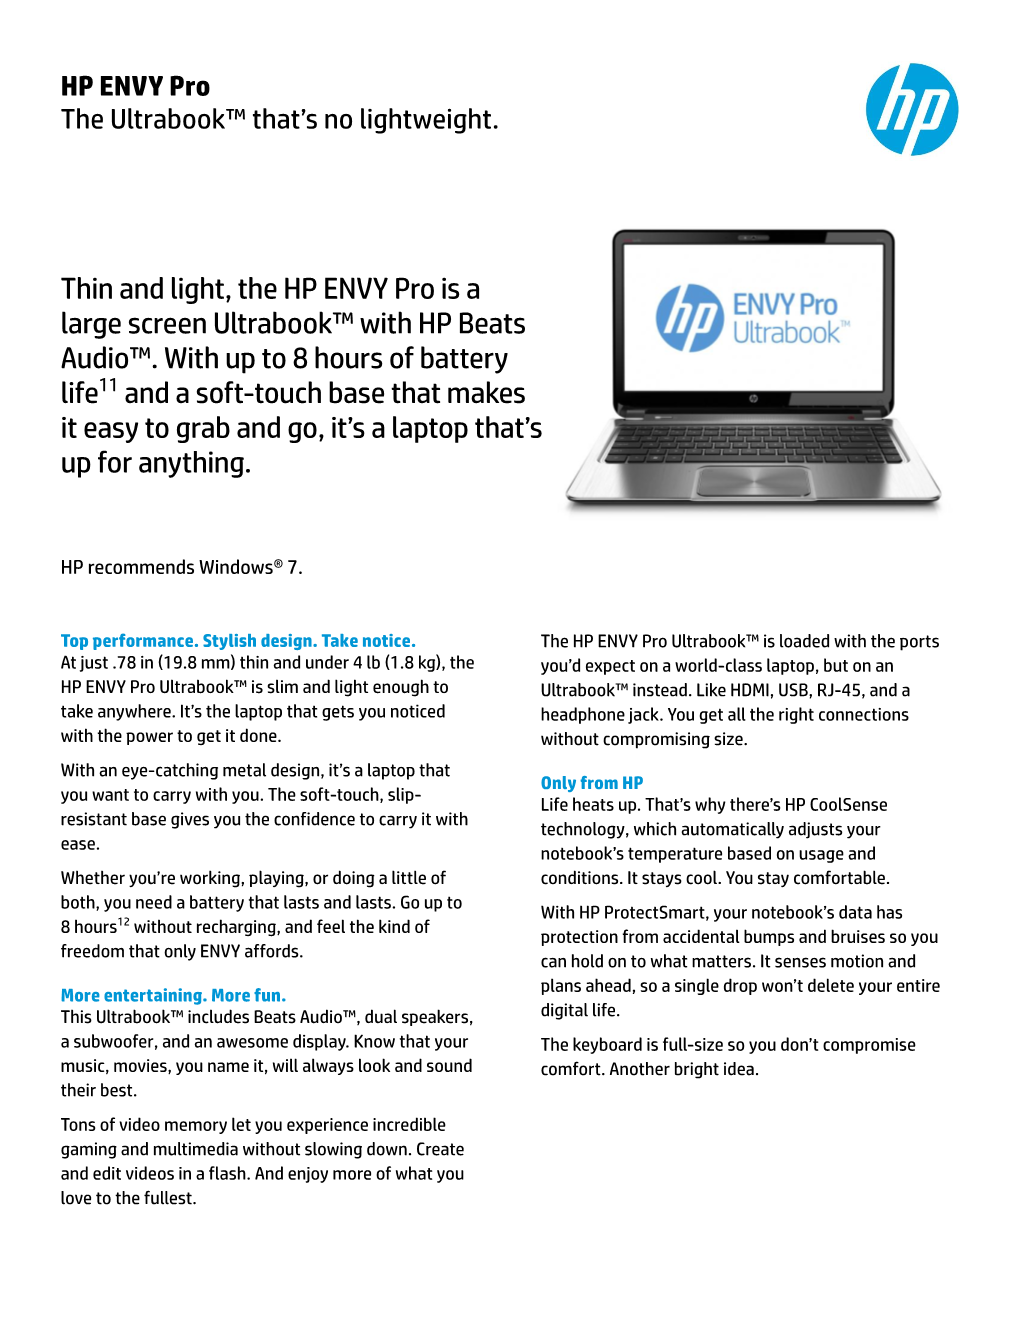 Thin and Light, the HP ENVY Pro Is a Large Screen Ultrabook™ with HP Beats Audio™